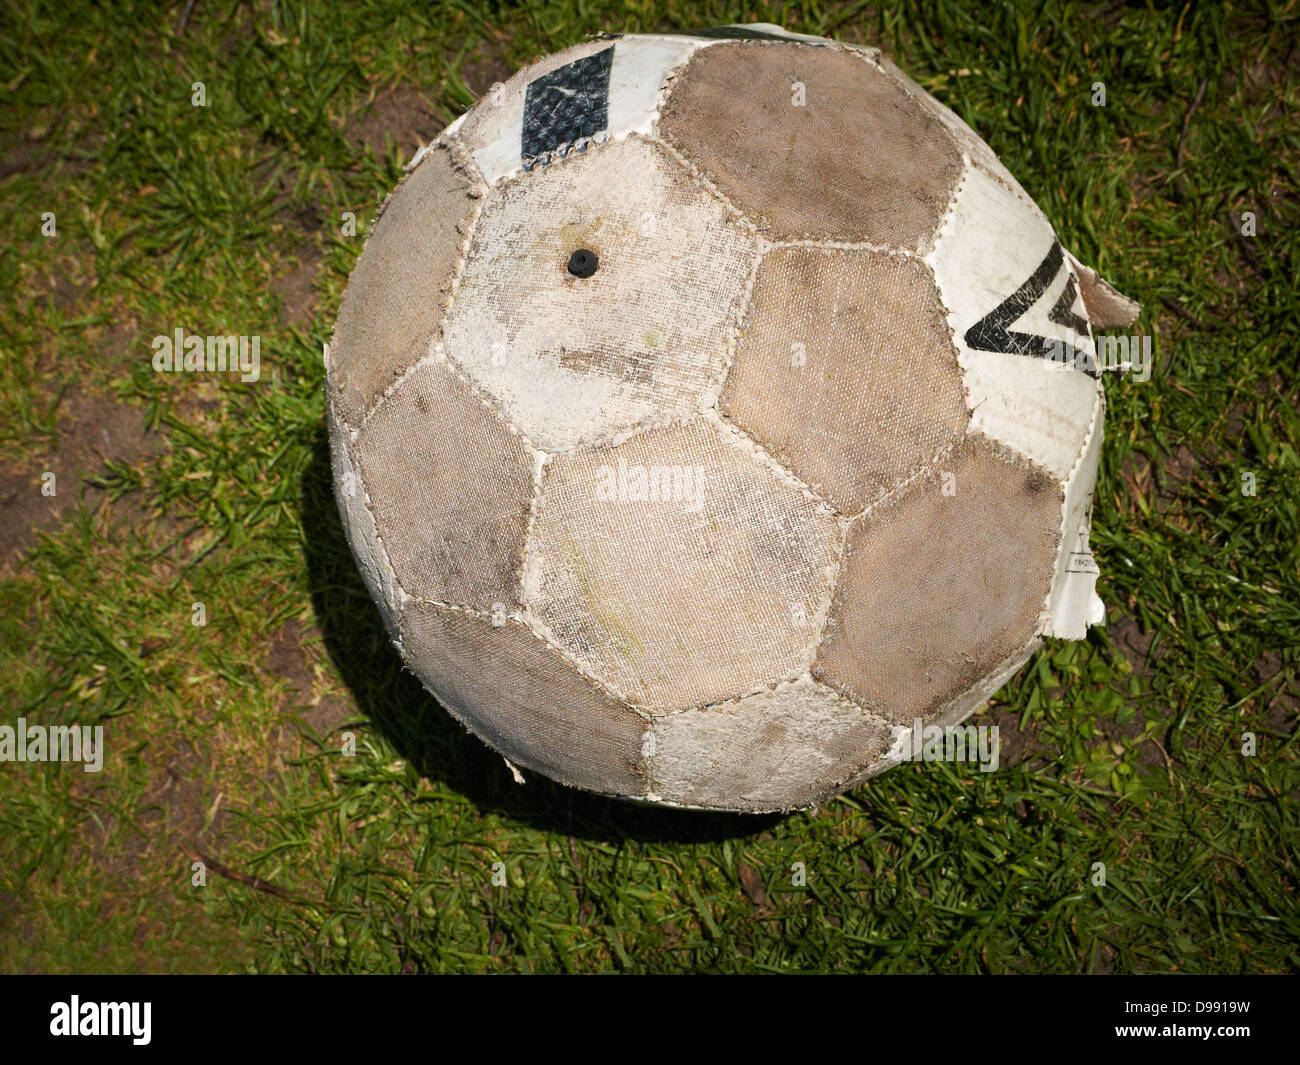 Worn out football on pitch Stock Photo